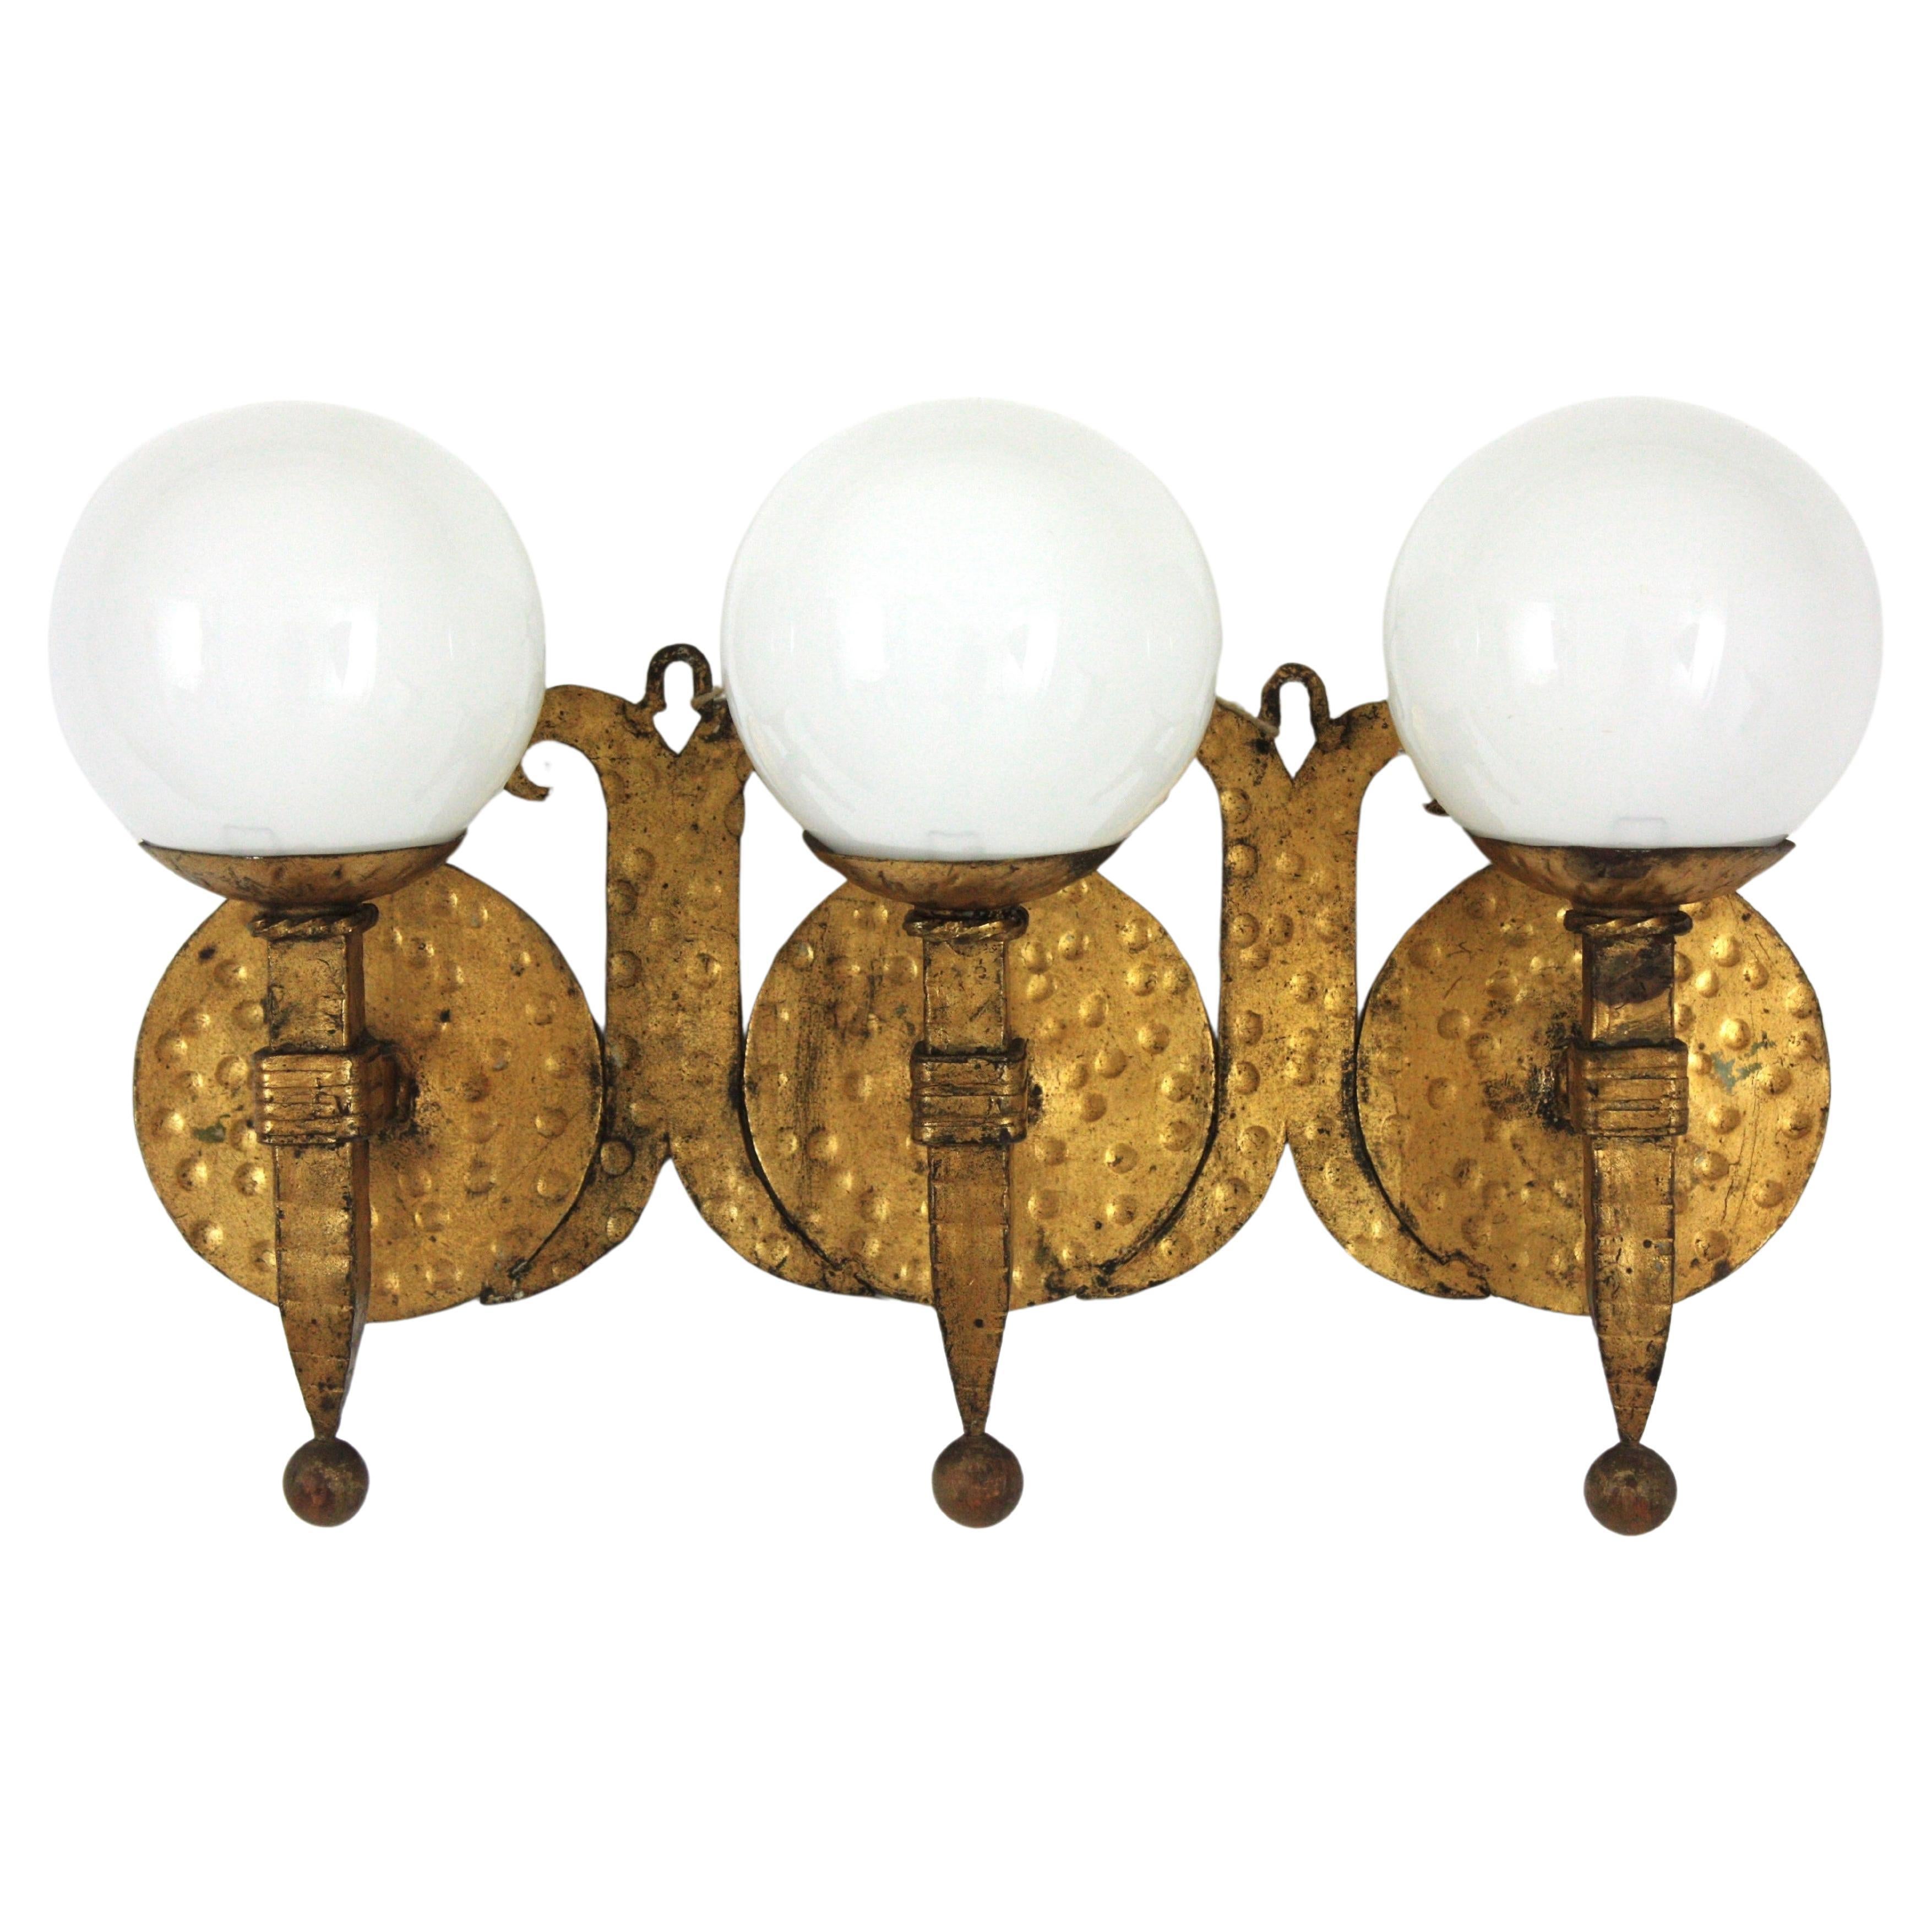 Spanish Revival Gilt Iron Torch Wall Light with Three Milk Glass Globes